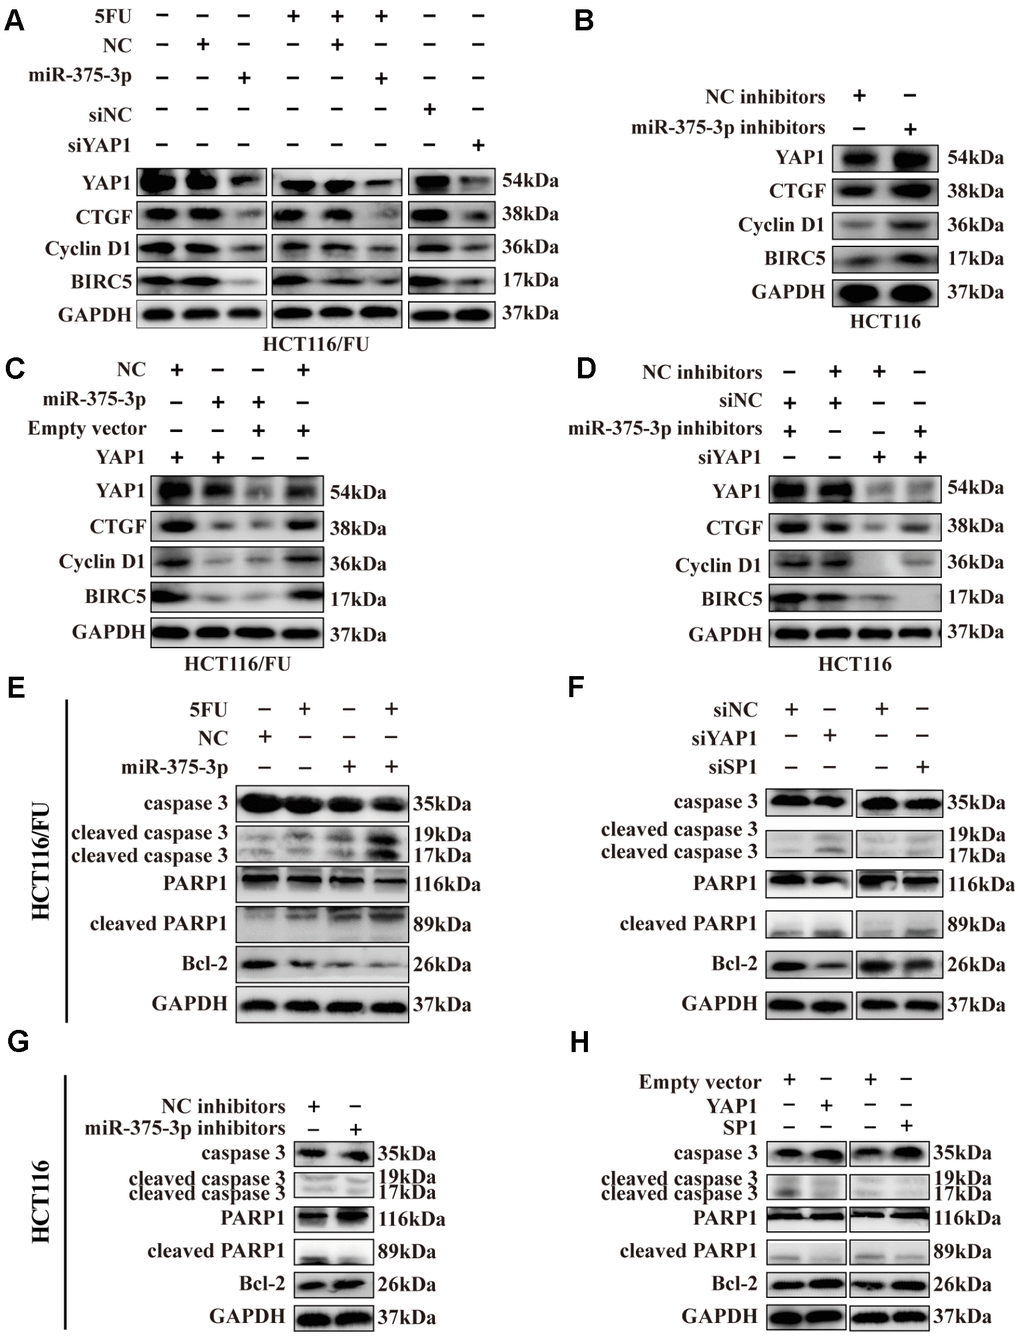 Expression of SP1, YAP1 and its downstream proteins, apoptosis-related proteins were regulated by miR-375-3p. (A) Transfection of miR-375-3p mimics into HCT116/FU cells with or not with 5FU treatment inhibited the expression of Hippo-YAP1 pathway-associated downstream proteins. Expression of the indicated proteins was detected by western blot. (B) Transfection of miR-375-3p inhibitors into HCT116 cells promoted the expression of Hippo-YAP1 pathway-associated downstream proteins. Expression of the indicated proteins was detected by western blot. (C) The inhibited effects of miR-375-3p on Hippo-YAP1 pathway-related downstream proteins were abolished by transfection of YAP1 overexpressing plasmid in HCT116/FU cells. (D) The promoted effects of miR-375-3p inhibitors on Hippo-YAP1 pathway-related downstream proteins were reversed by transfection of siYAP1 in HCT116 cells. (E, F) The apoptosis-related proteins expression levels were detected in HCT116/FU cells transfected with miR-375-3p (left) or siYAP1/siSP1 (right). MiR-375-3p and siYAP1 and siSP1 promotes apoptosis in protein level. (G, H) The apoptosis-related proteins expression levels were detected in HCT116 cells transfected with miR-375-3p inhibitors (left) or YAP1/SP1 overexpressing plasmids (right). MiR-375-3p inhibitors and YAP1 or SP1 inhibits apoptosis in protein level.